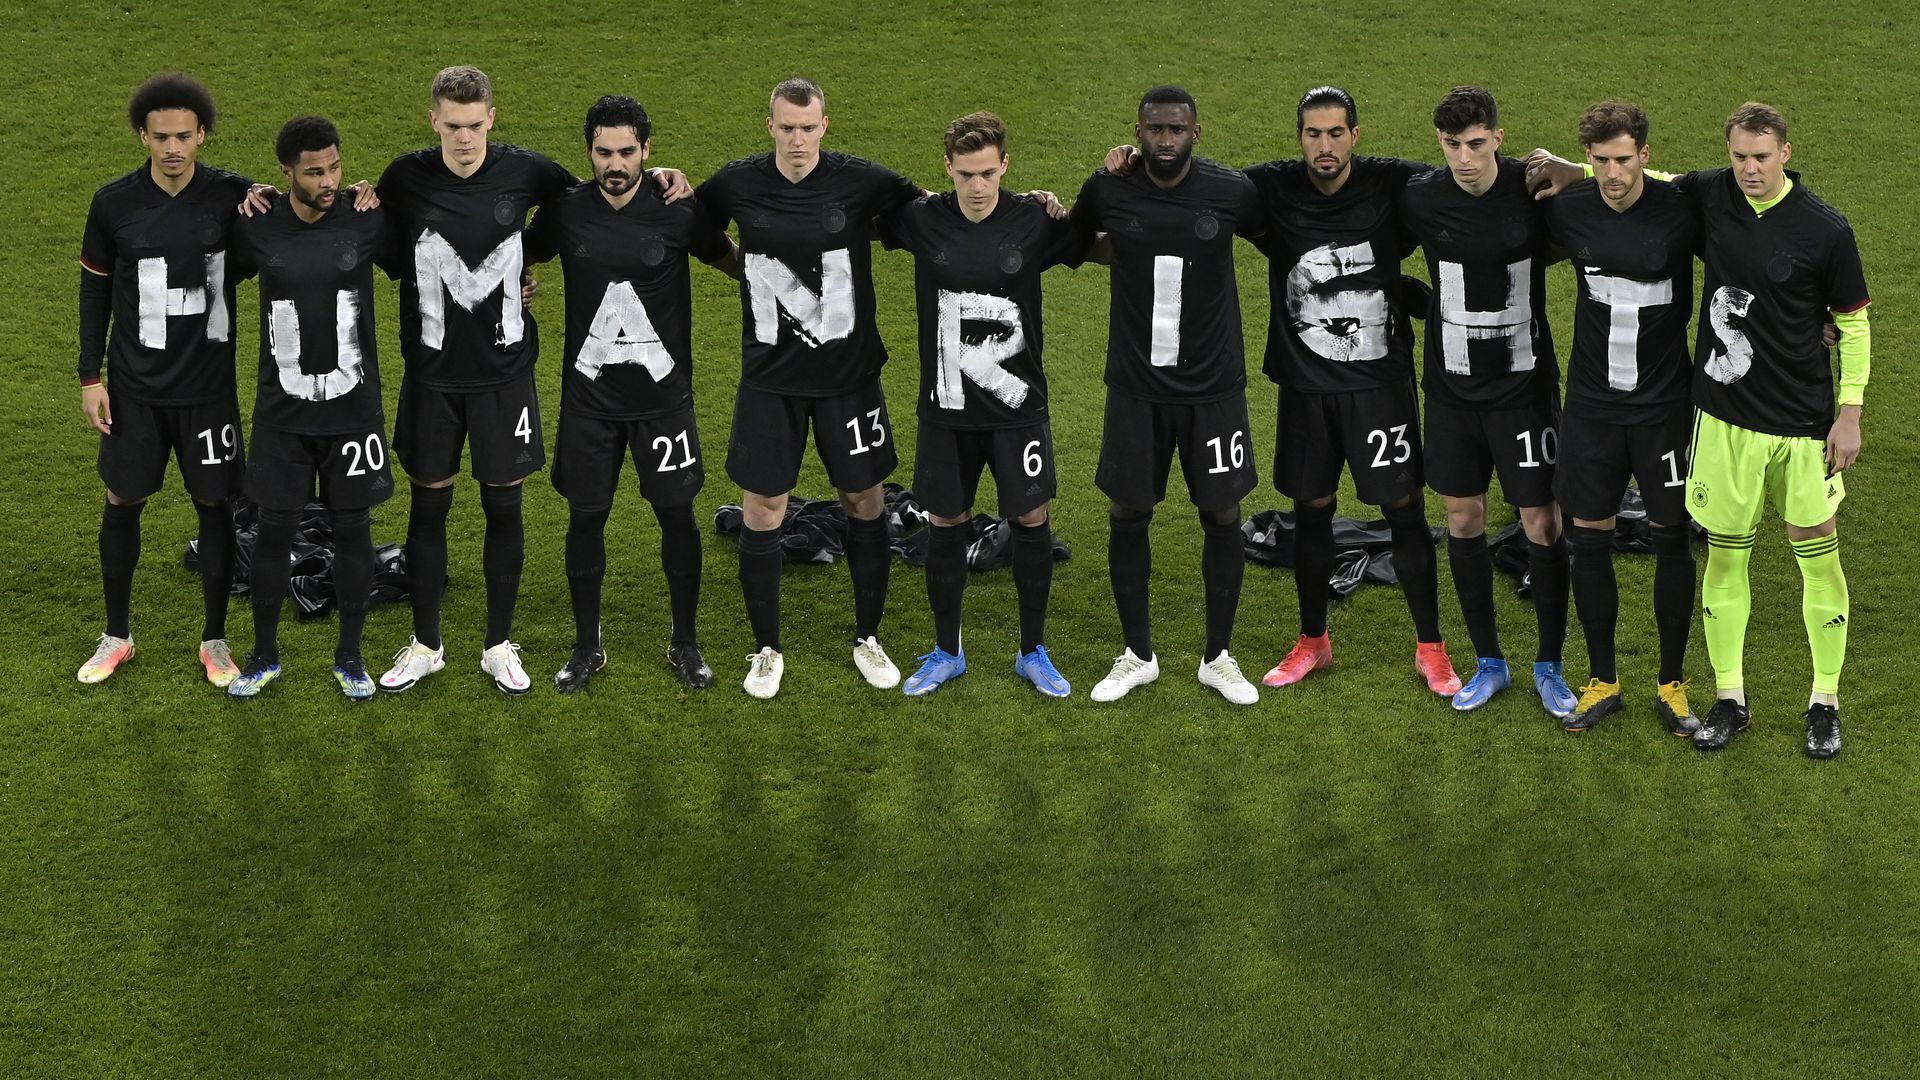 Players spell out human rights on their shirts.